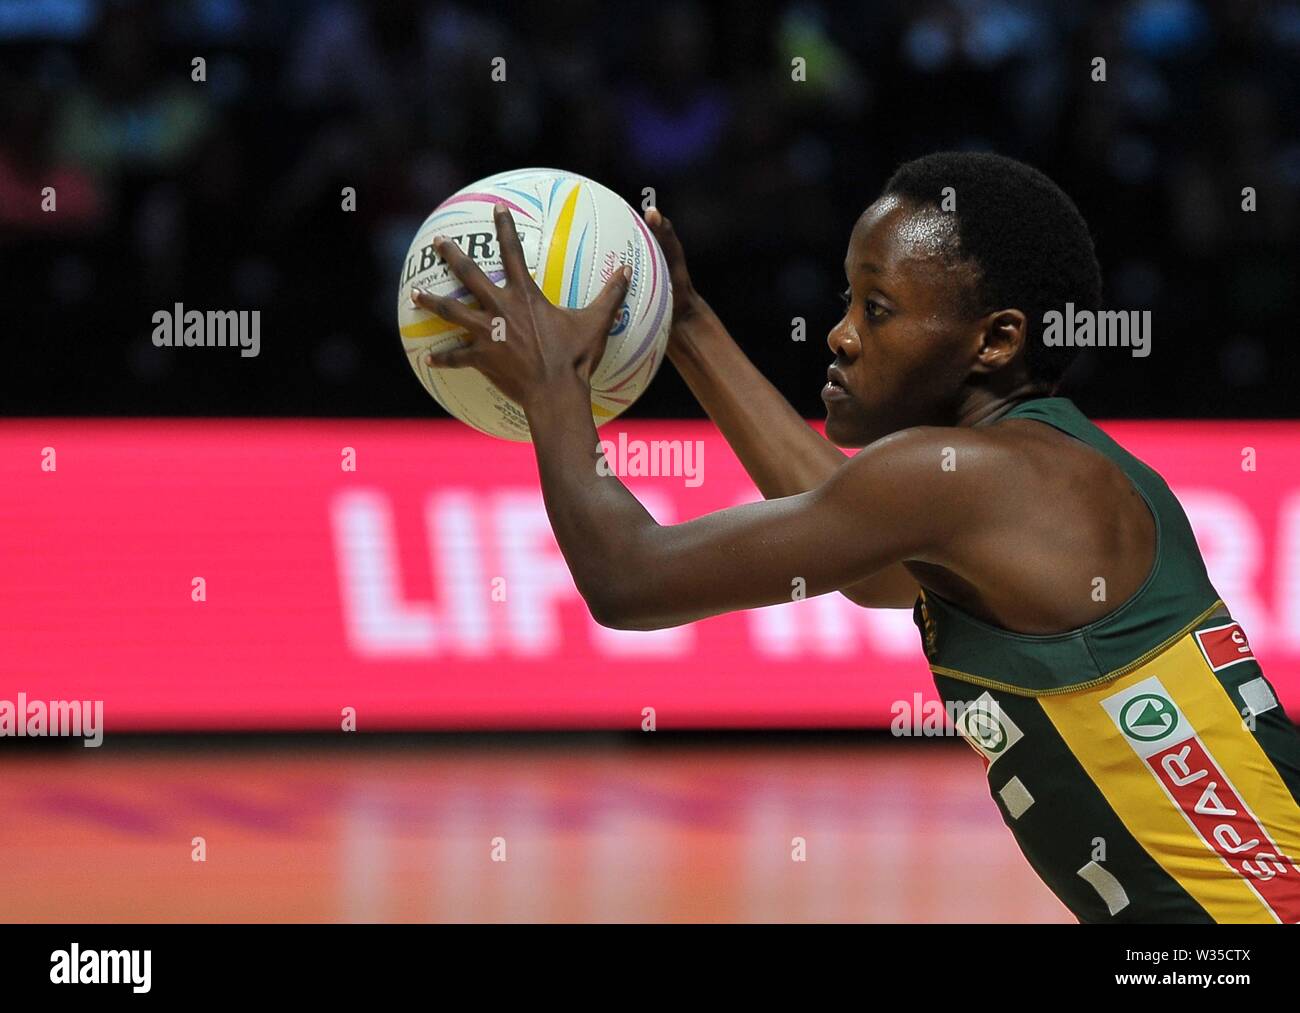 Liverpool. United Kingdom. 12 July 2019. Bongiwe Msomi (South Africa) during the Preliminary game between South Africa and Trinidad and Tobago at the Netball World Cup. M and S arena, Liverpool. Merseyside. UK. Credit Garry Bowdenh/SIP photo agency/Alamy live news. Stock Photo